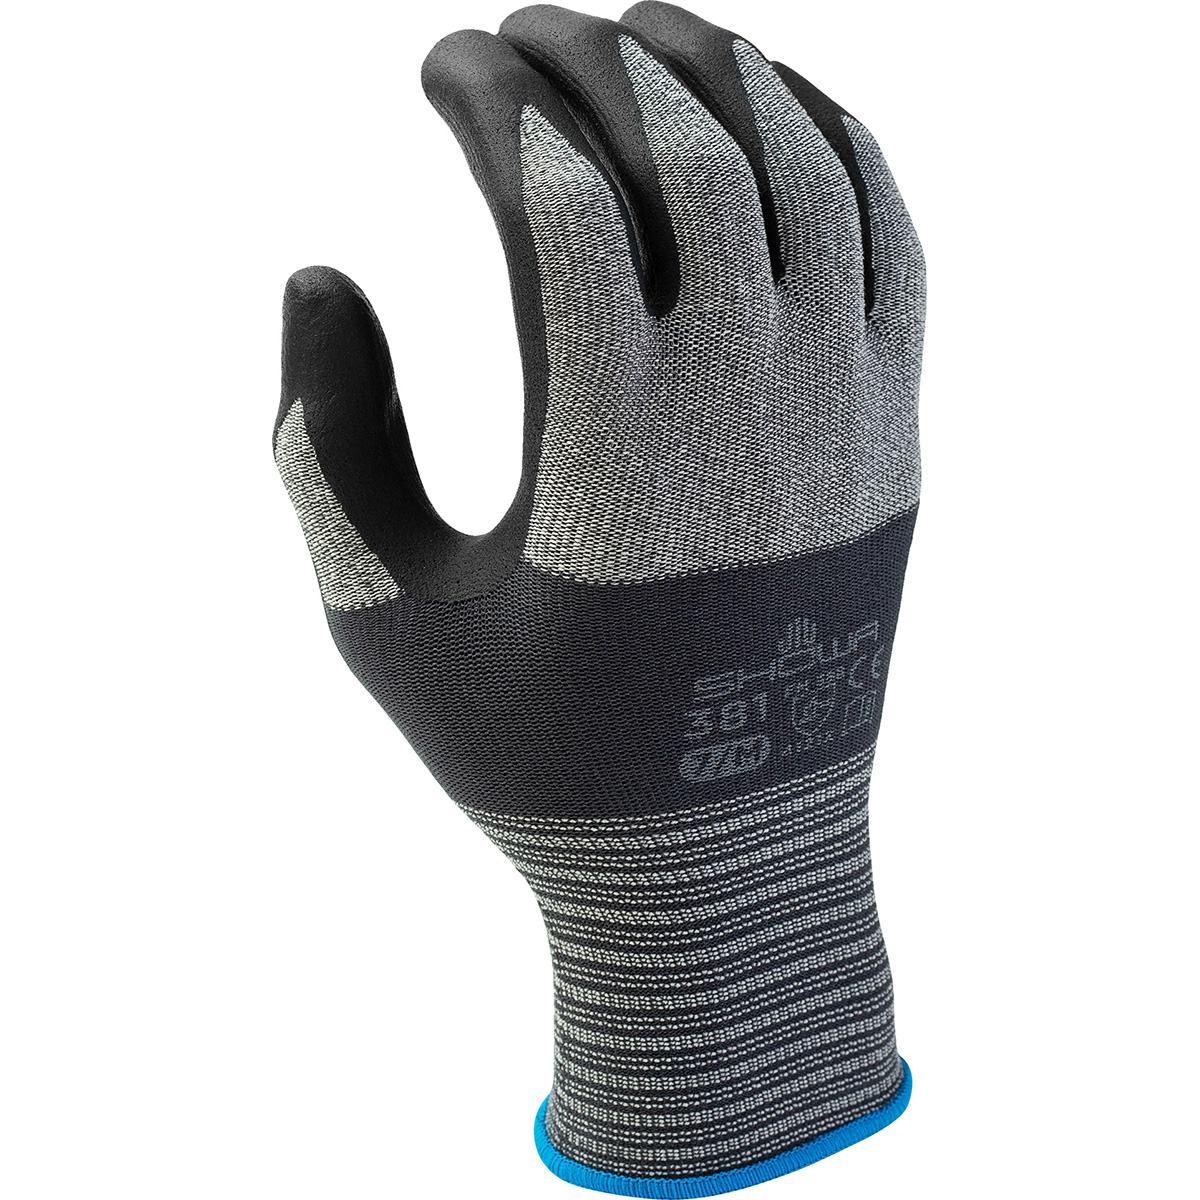 General purpose, "S" pattern foamed nitrile coated, grey /black coating, seamless, breathable microfiber knit liner, extra-extra large